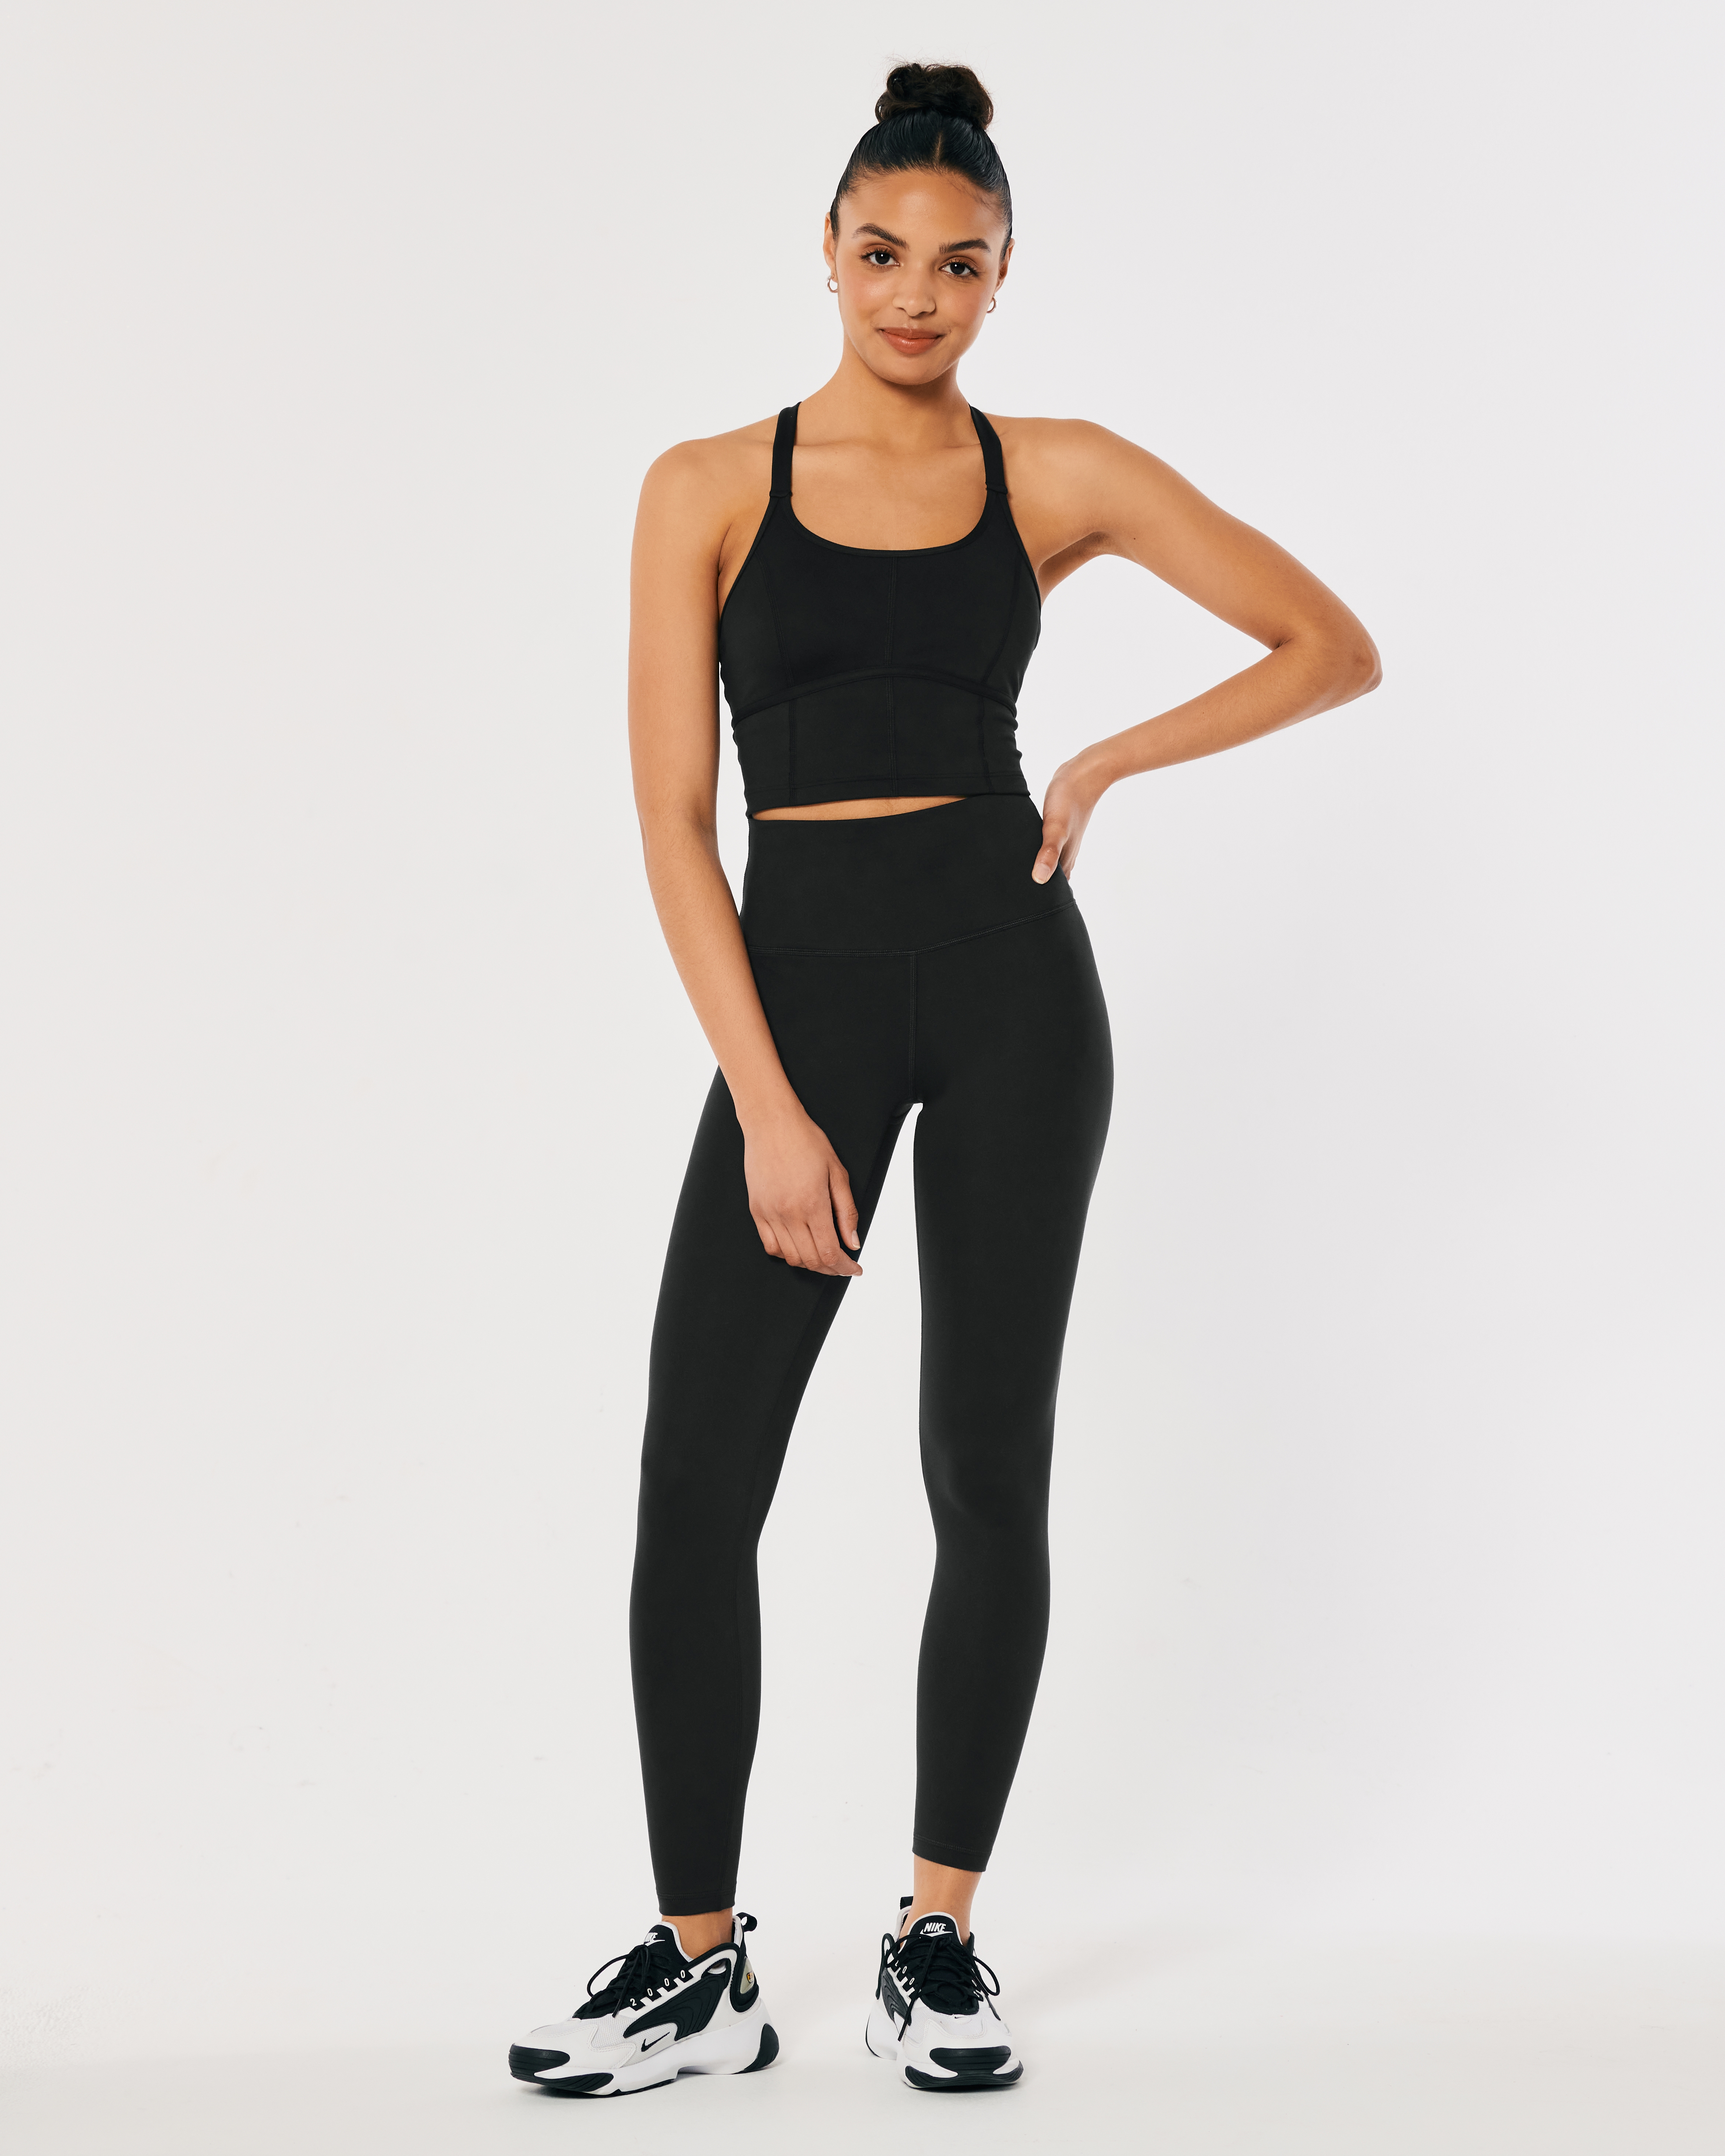 Women's Gilly Hicks Active Recharge High-Rise Mini Flare Leggings